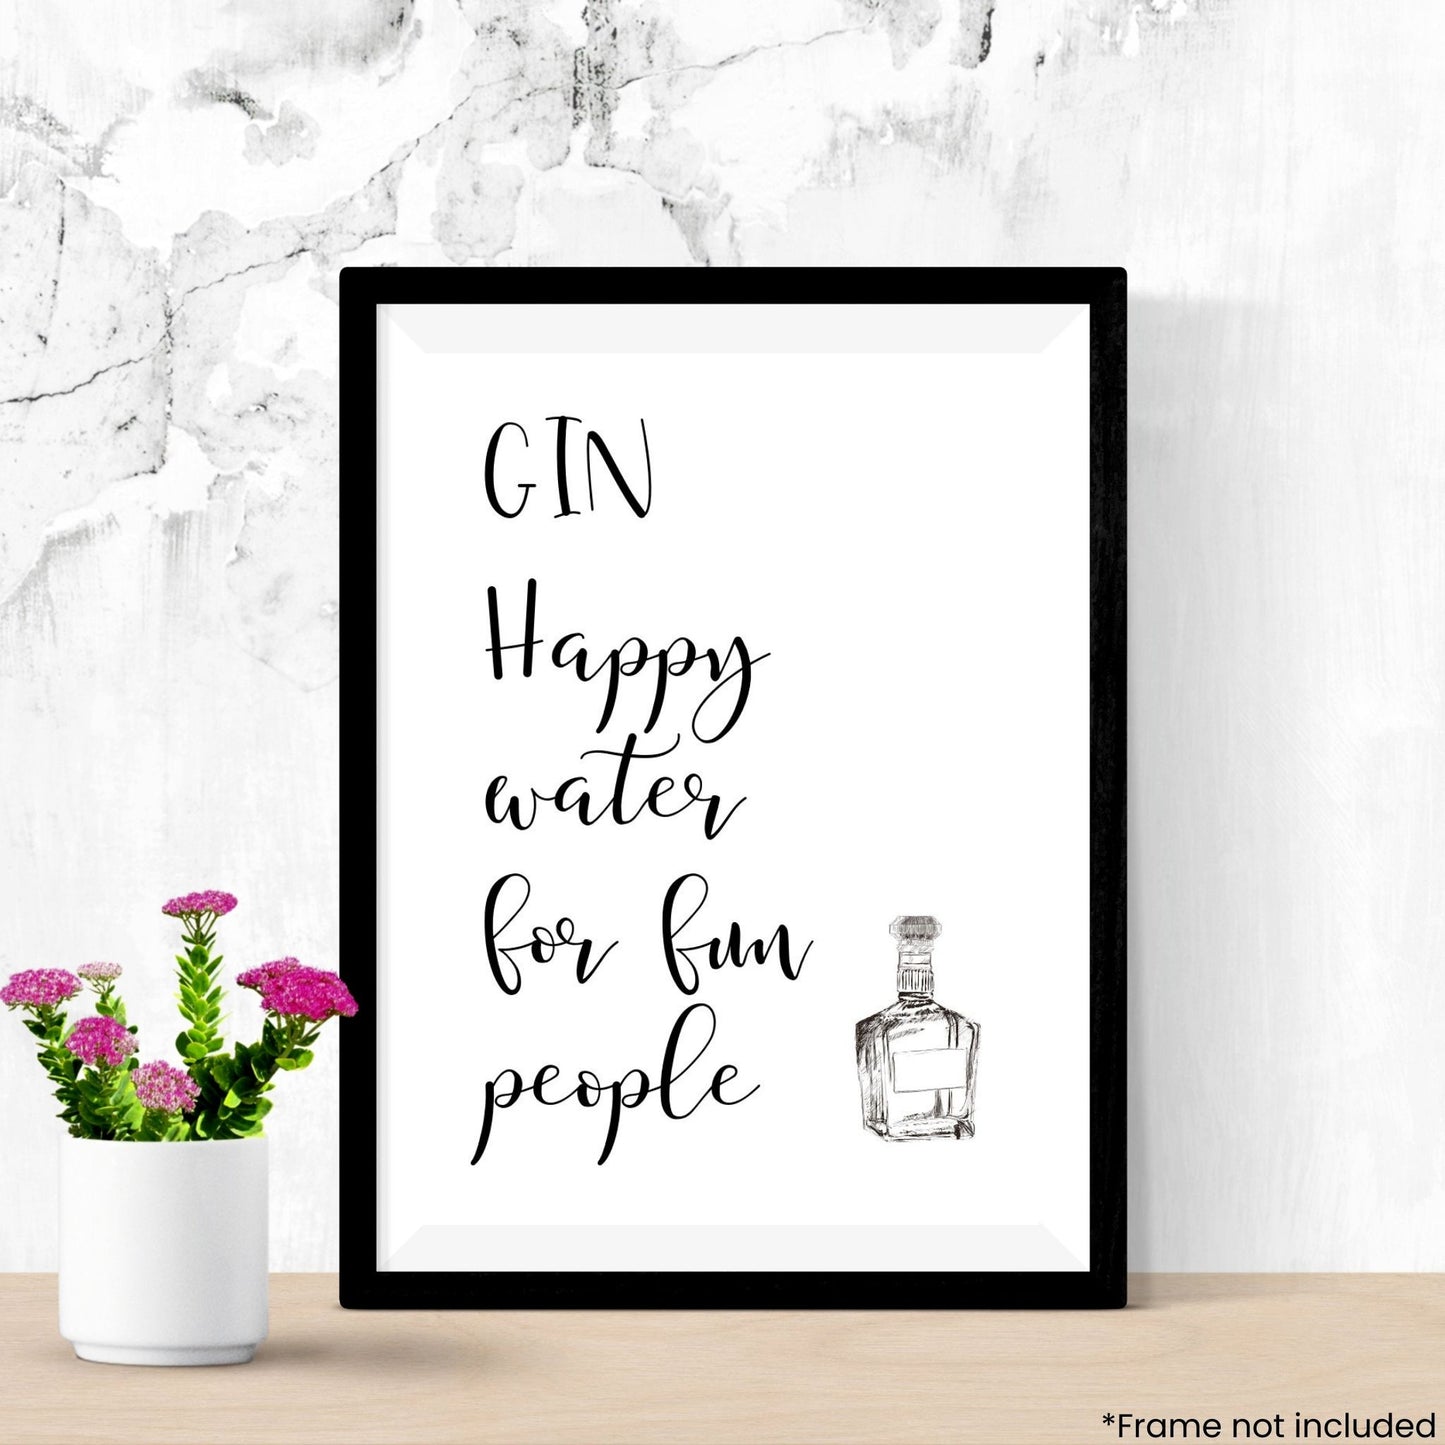 gin-happy-water-for-fun-people in frame